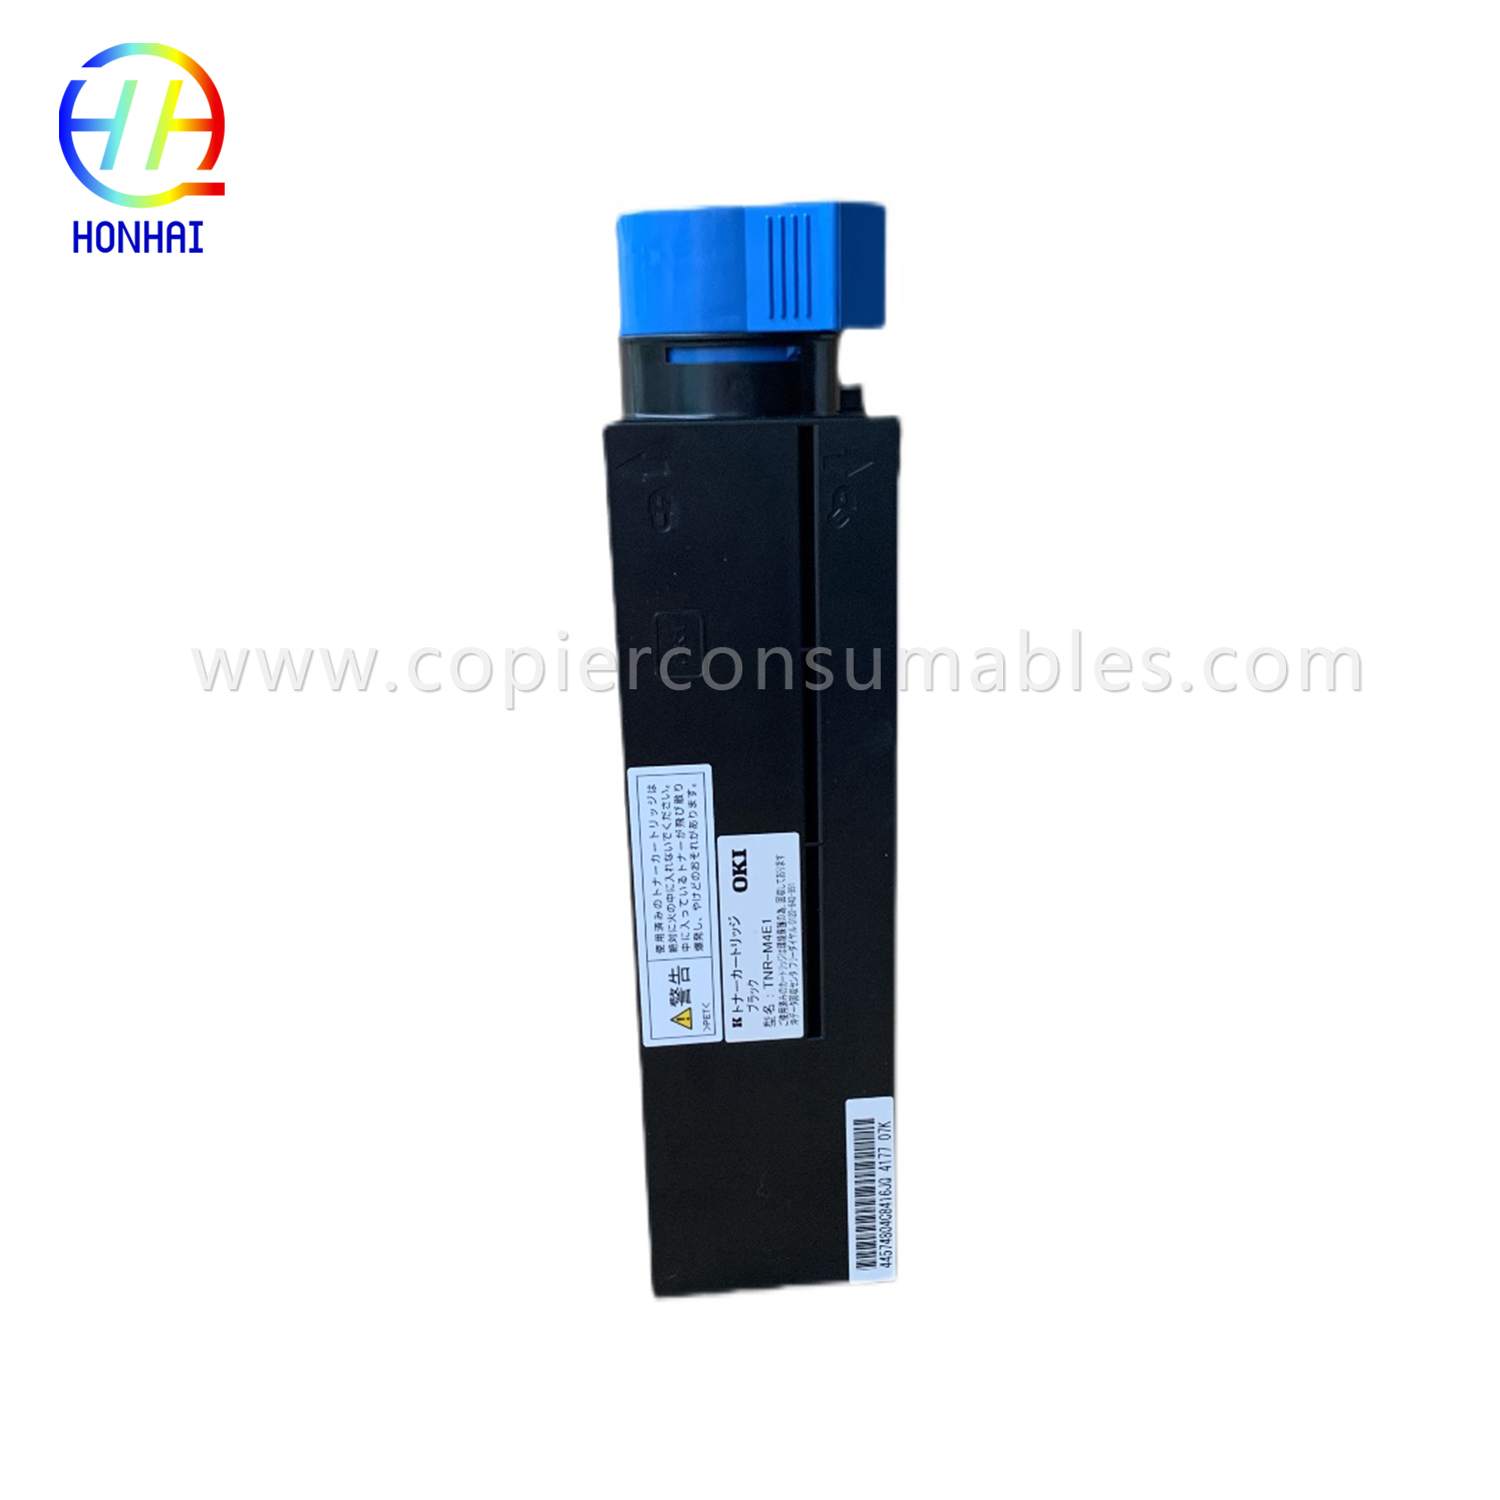 Cetris Toner ar gyfer Oki B432 B412DN B432DN B512DN MB492DN MB472W MB562dnw (45807122)